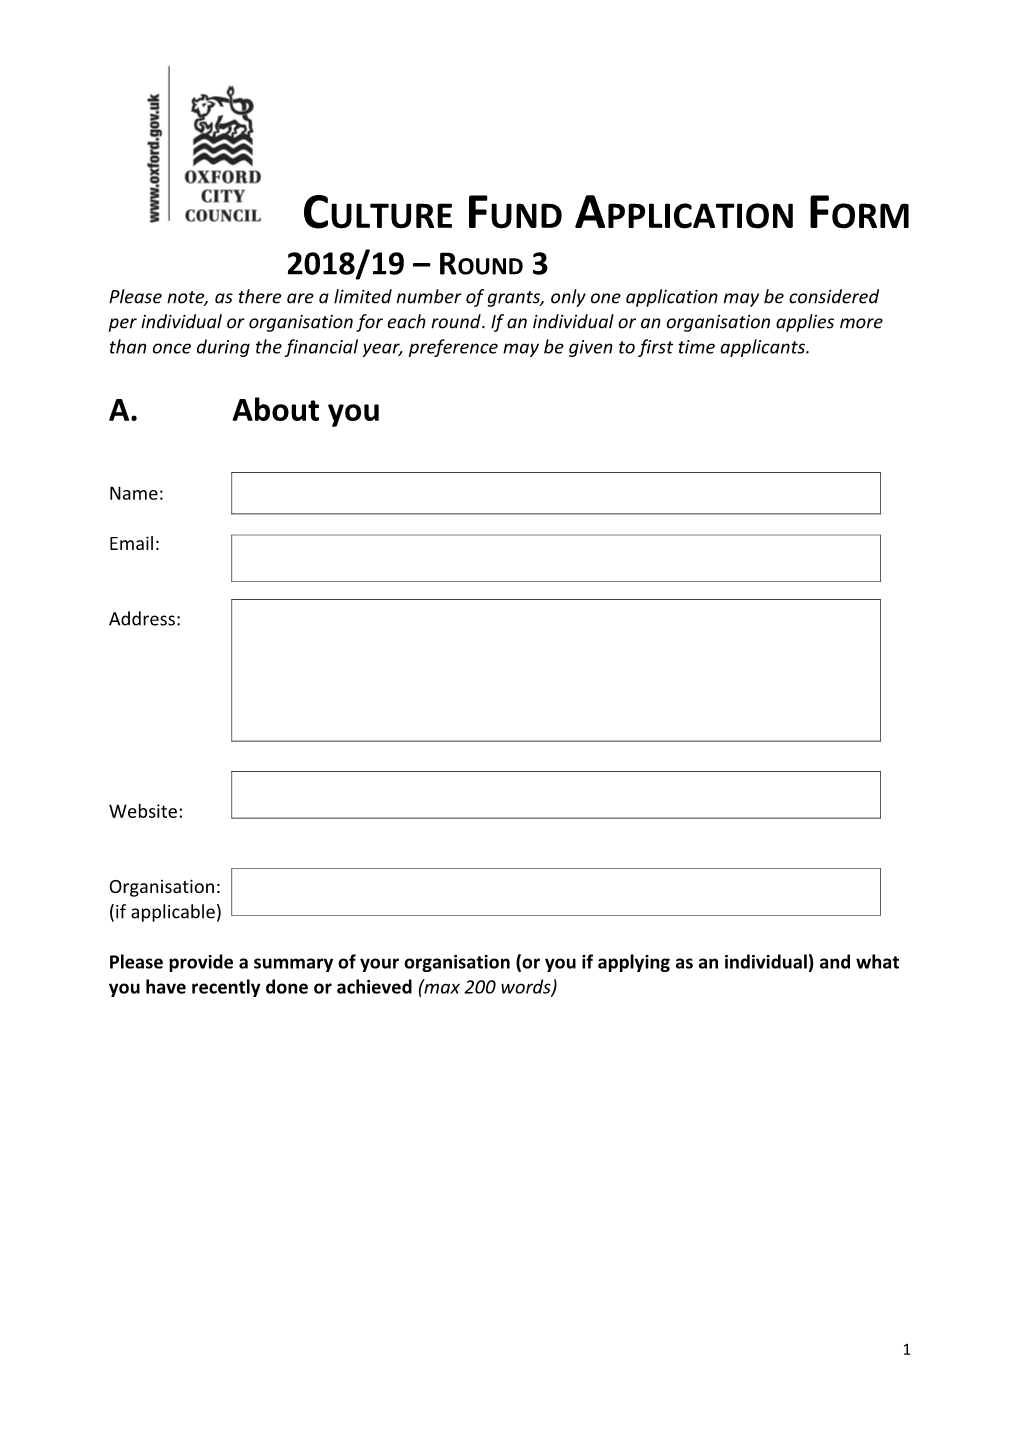 Application Form for Oxford City Council